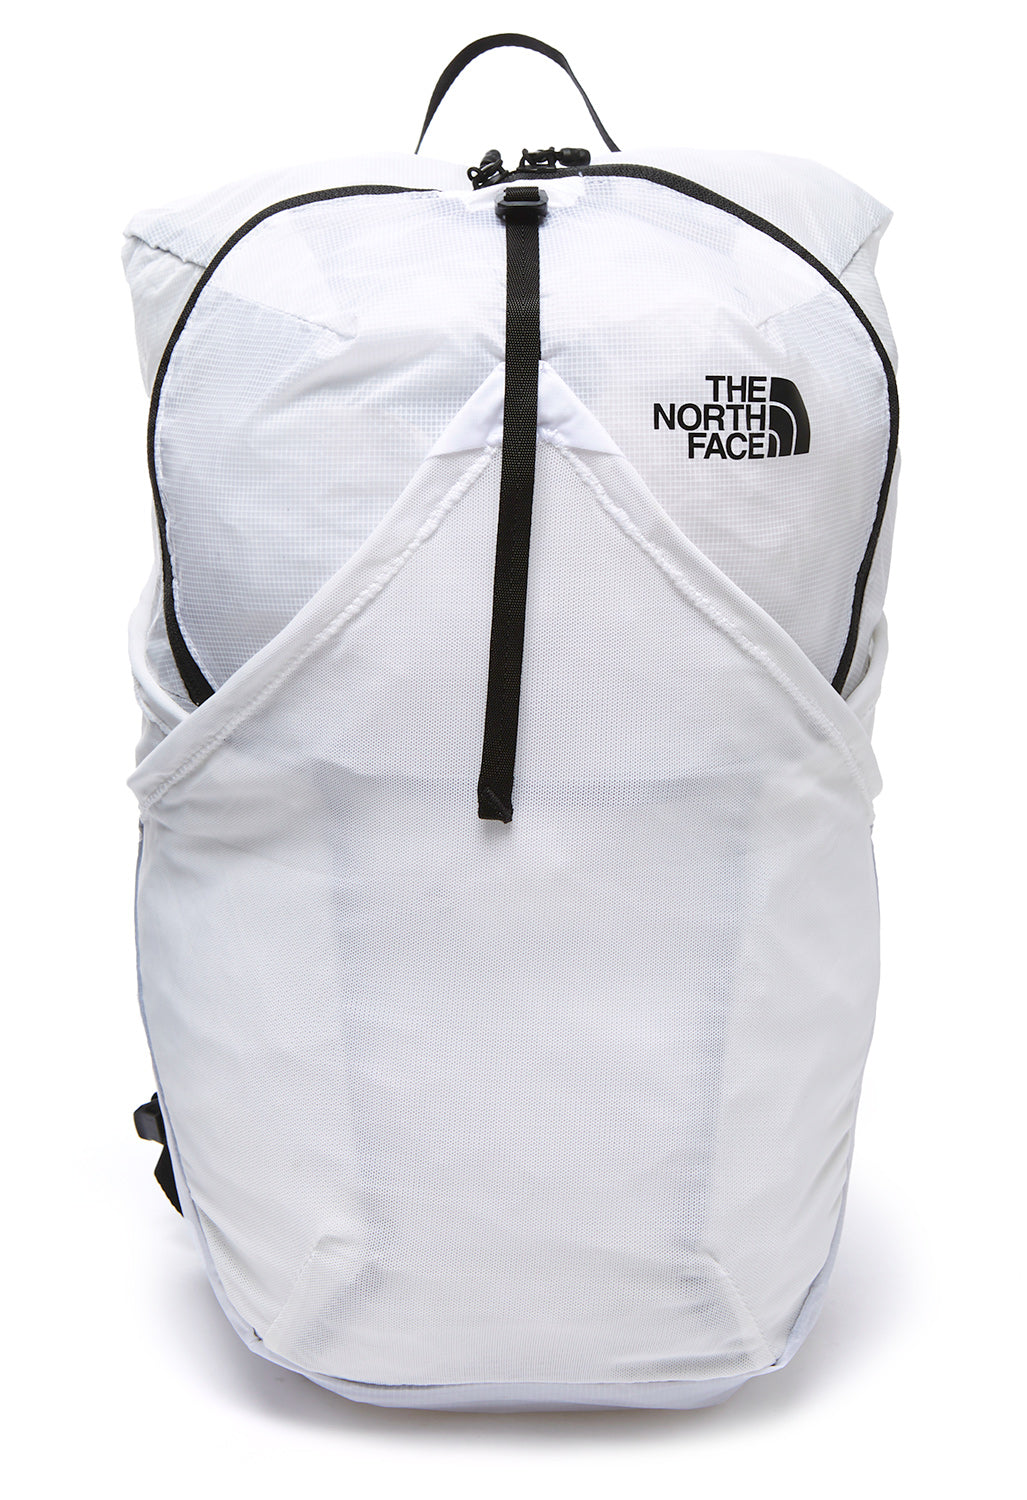 The North Face Flyweight Backpack 1